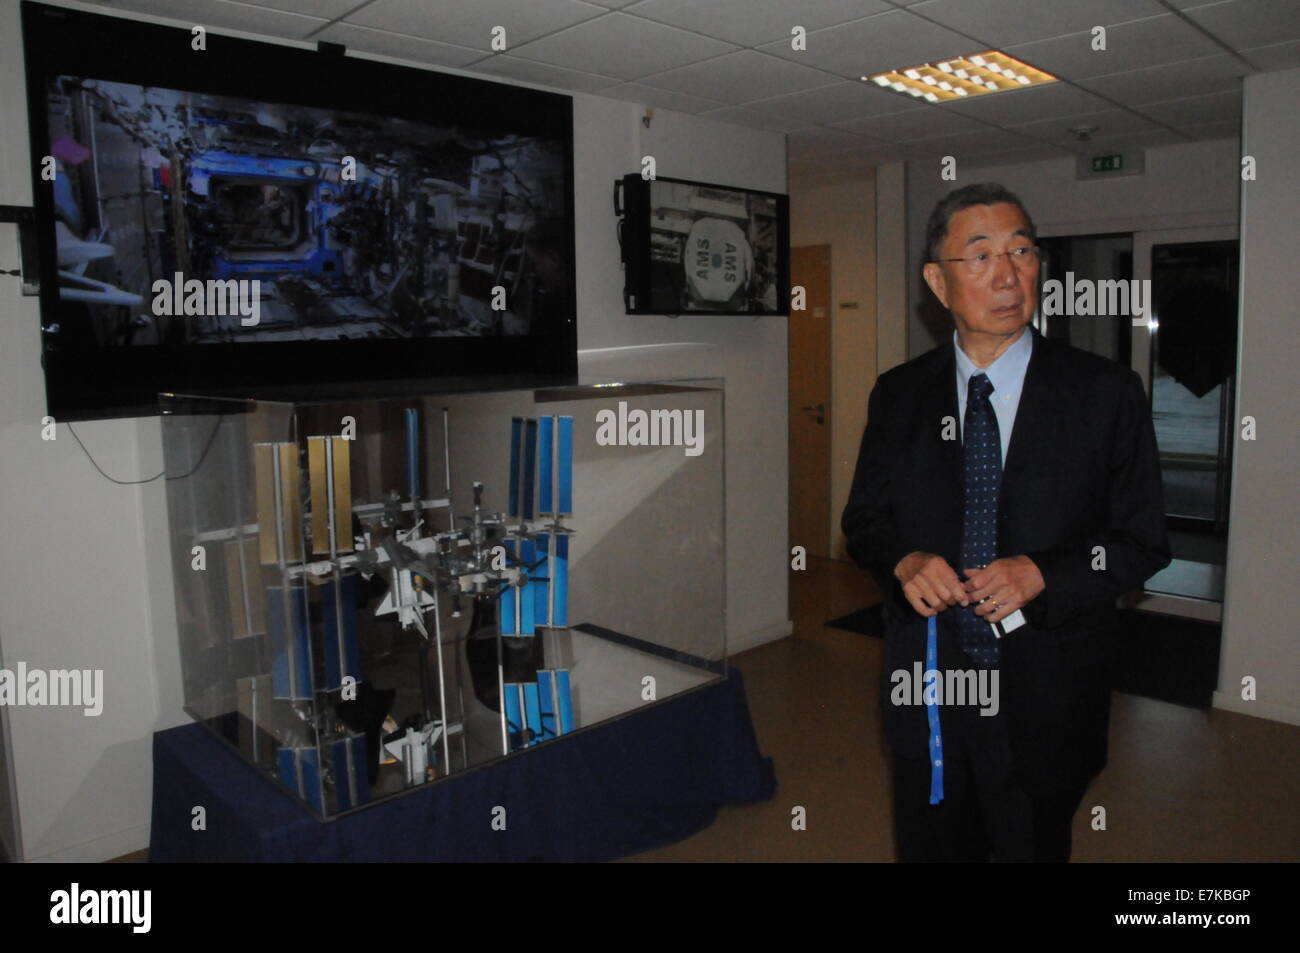 (140920) -- GENEVA, Sept. 20, 2014 (Xinhua) -- Nobel laureate Samuel Ting stands in front of the monitor of the International Space Station (ISS) in the laboratory in Geneva, Switzerland, Sept. 18, 2014. The Alpha Magnetic Spectrometer (AMS) team led by Ting announced on Thursday new results in the search for dark matter, shedding more light on the dark matter existence. Cosmic rays are charged high-energy particles that permeate space. The AMS, a particle physics detector installed on the ISS, is designed to study them before they have a chance to interact with the Earth's atmosphere. (Xinh Stock Photo